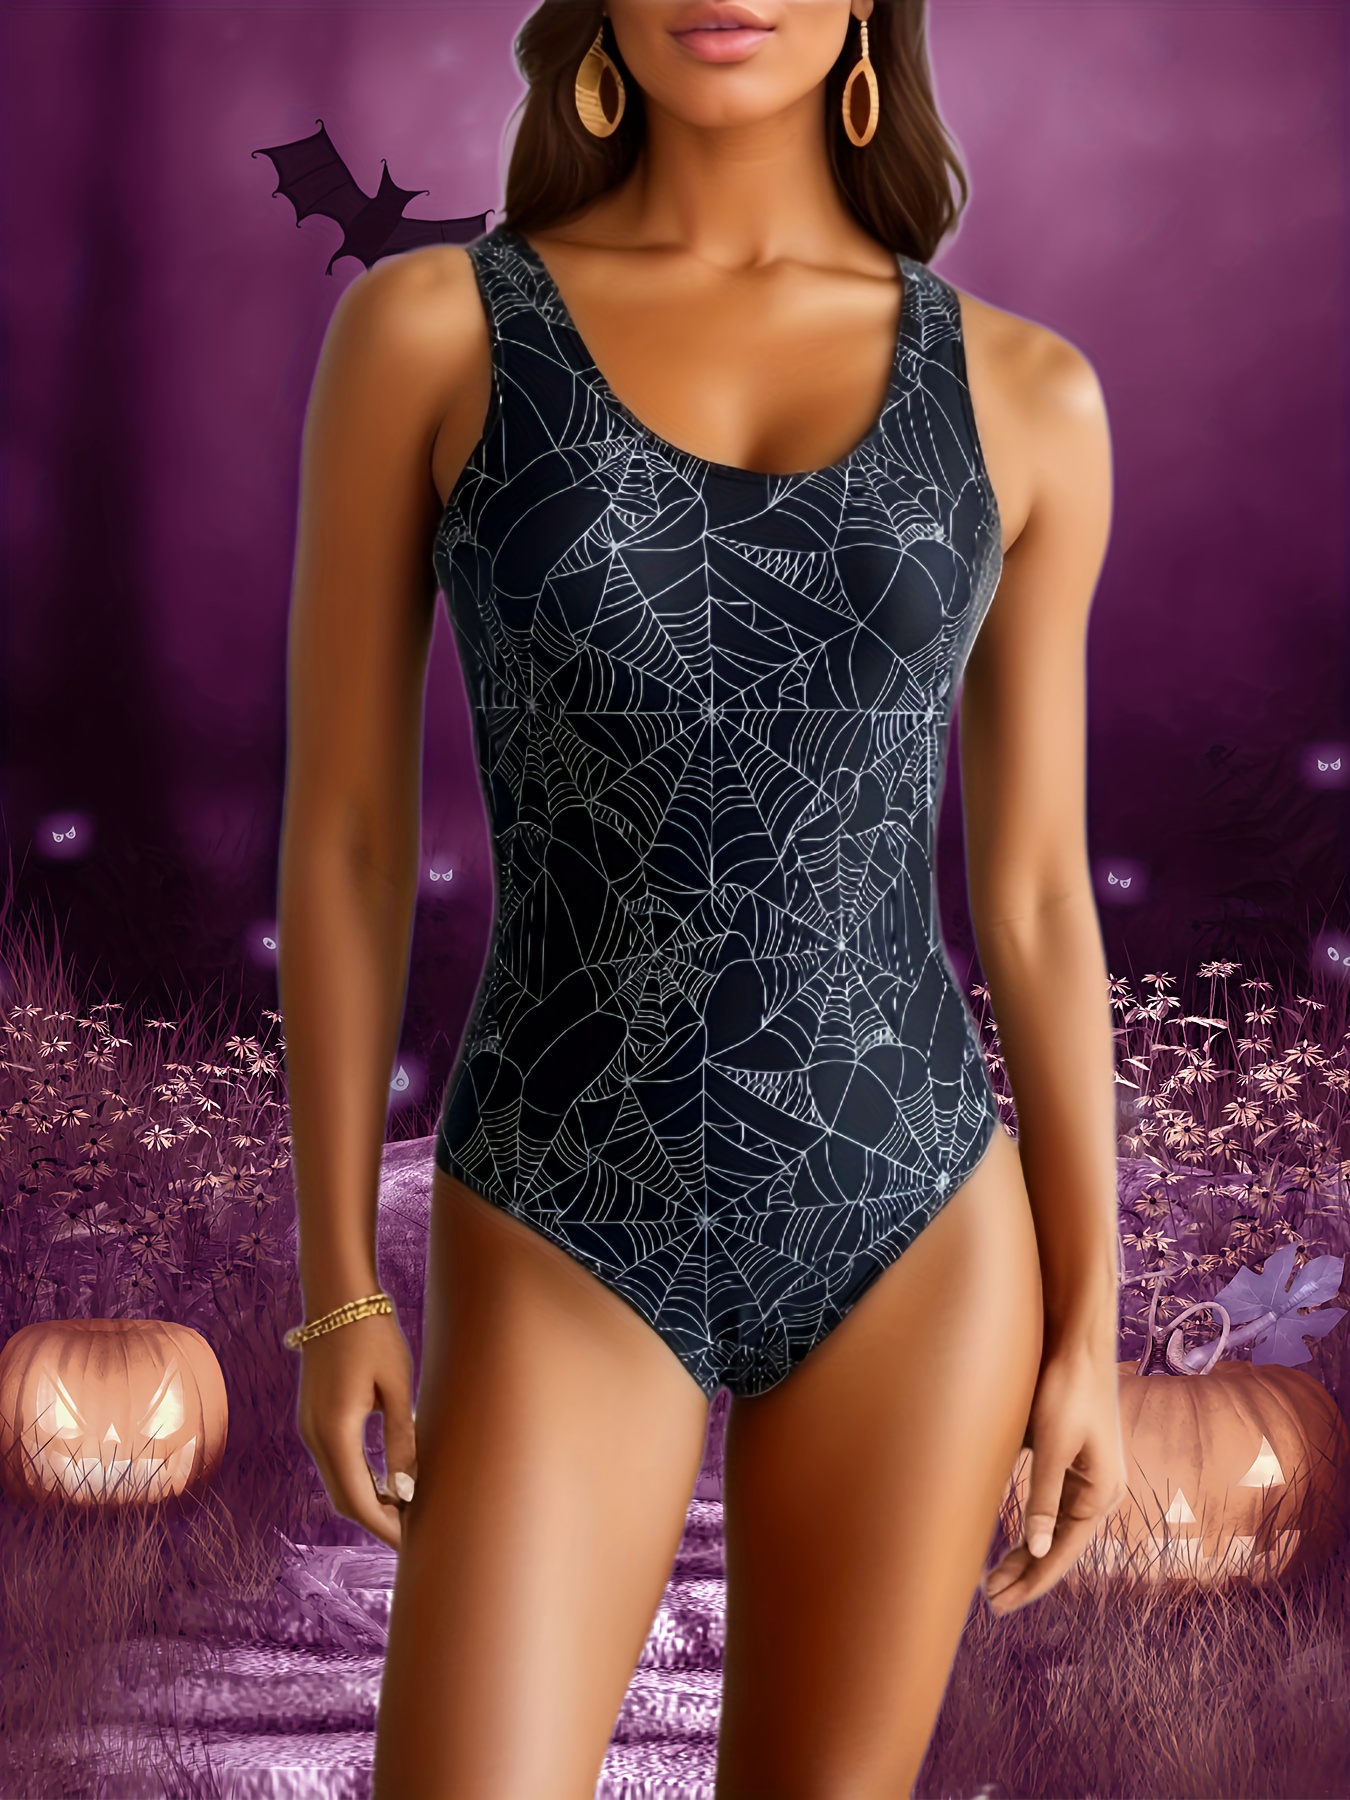 Spider Web Ghost Print Scoop Neck Black One-piece Swimsuit, Racer Back  Stretchy Halloween Goth Style Bathing Suits, Women's Swimwear & Clothing